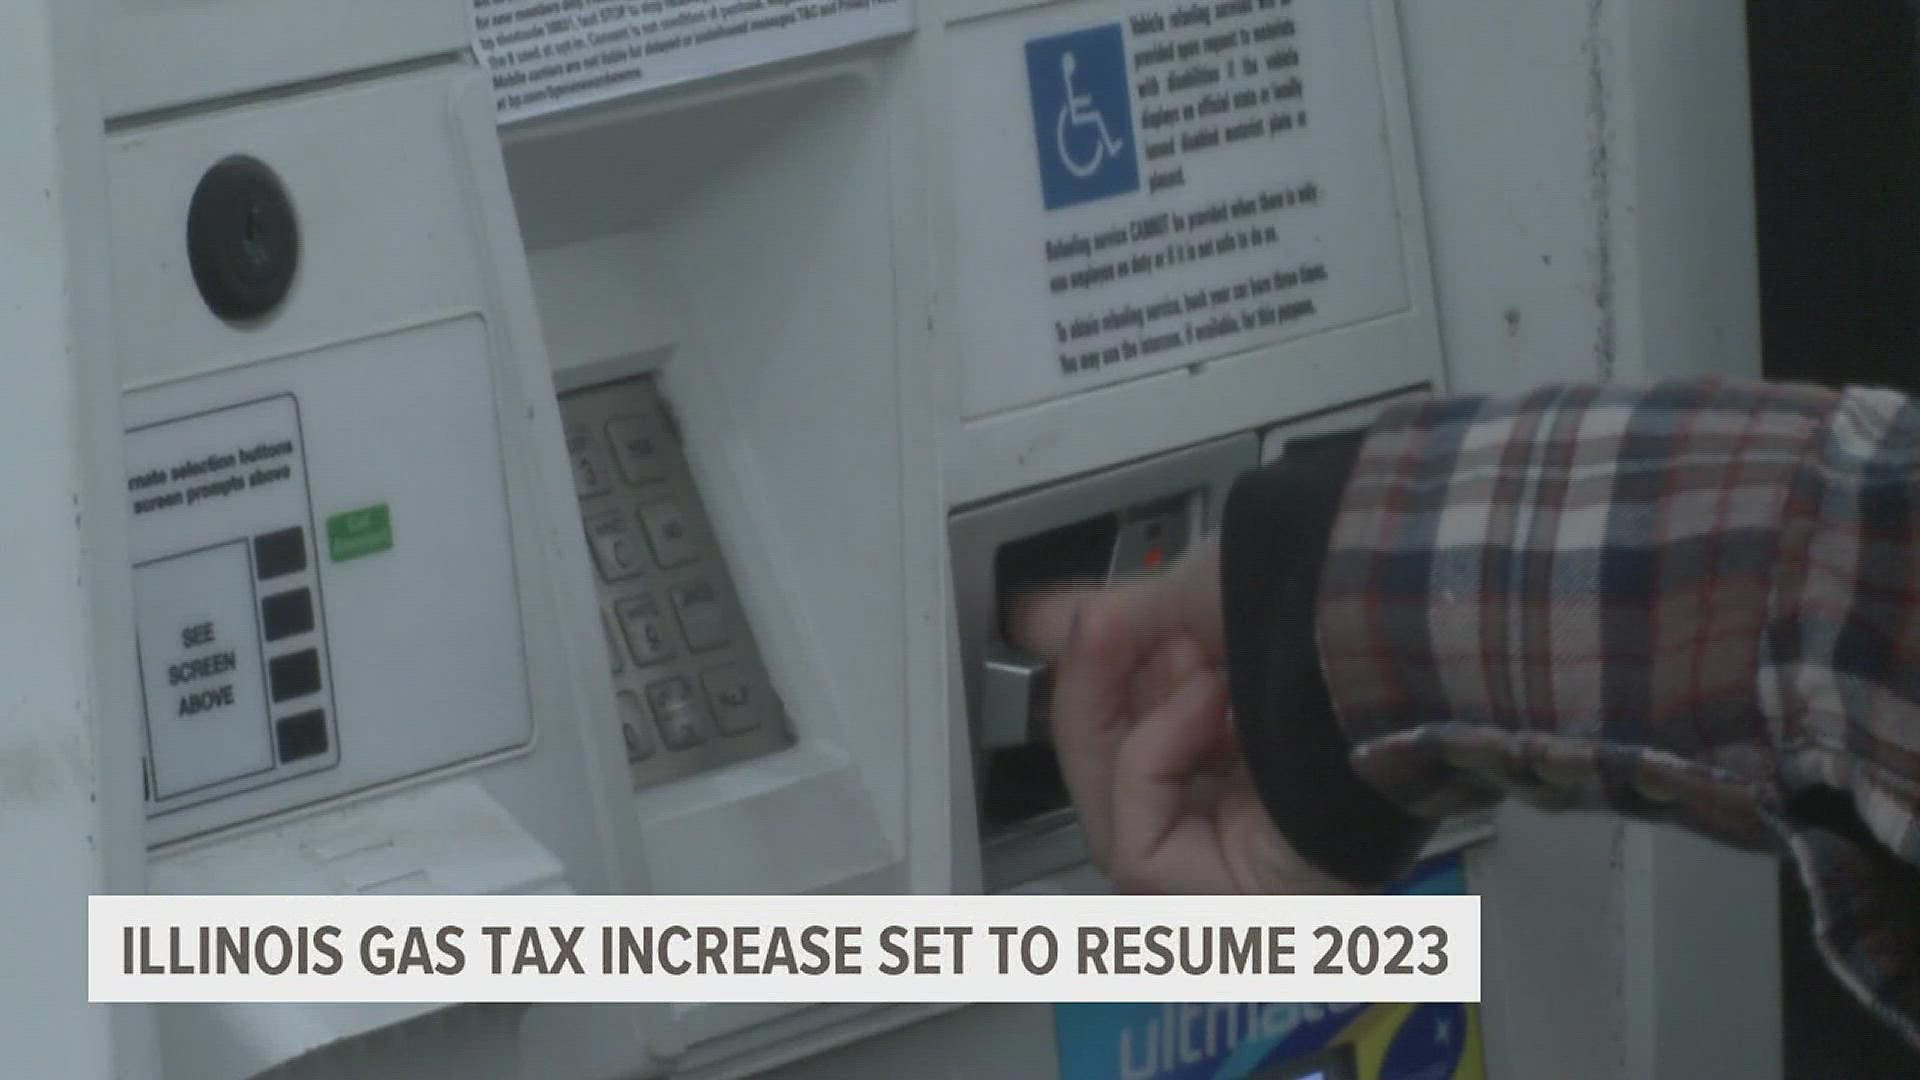 The gas tax will resume in January with a 3.1 cent per gallon increase. Another hike will happen that Summer.